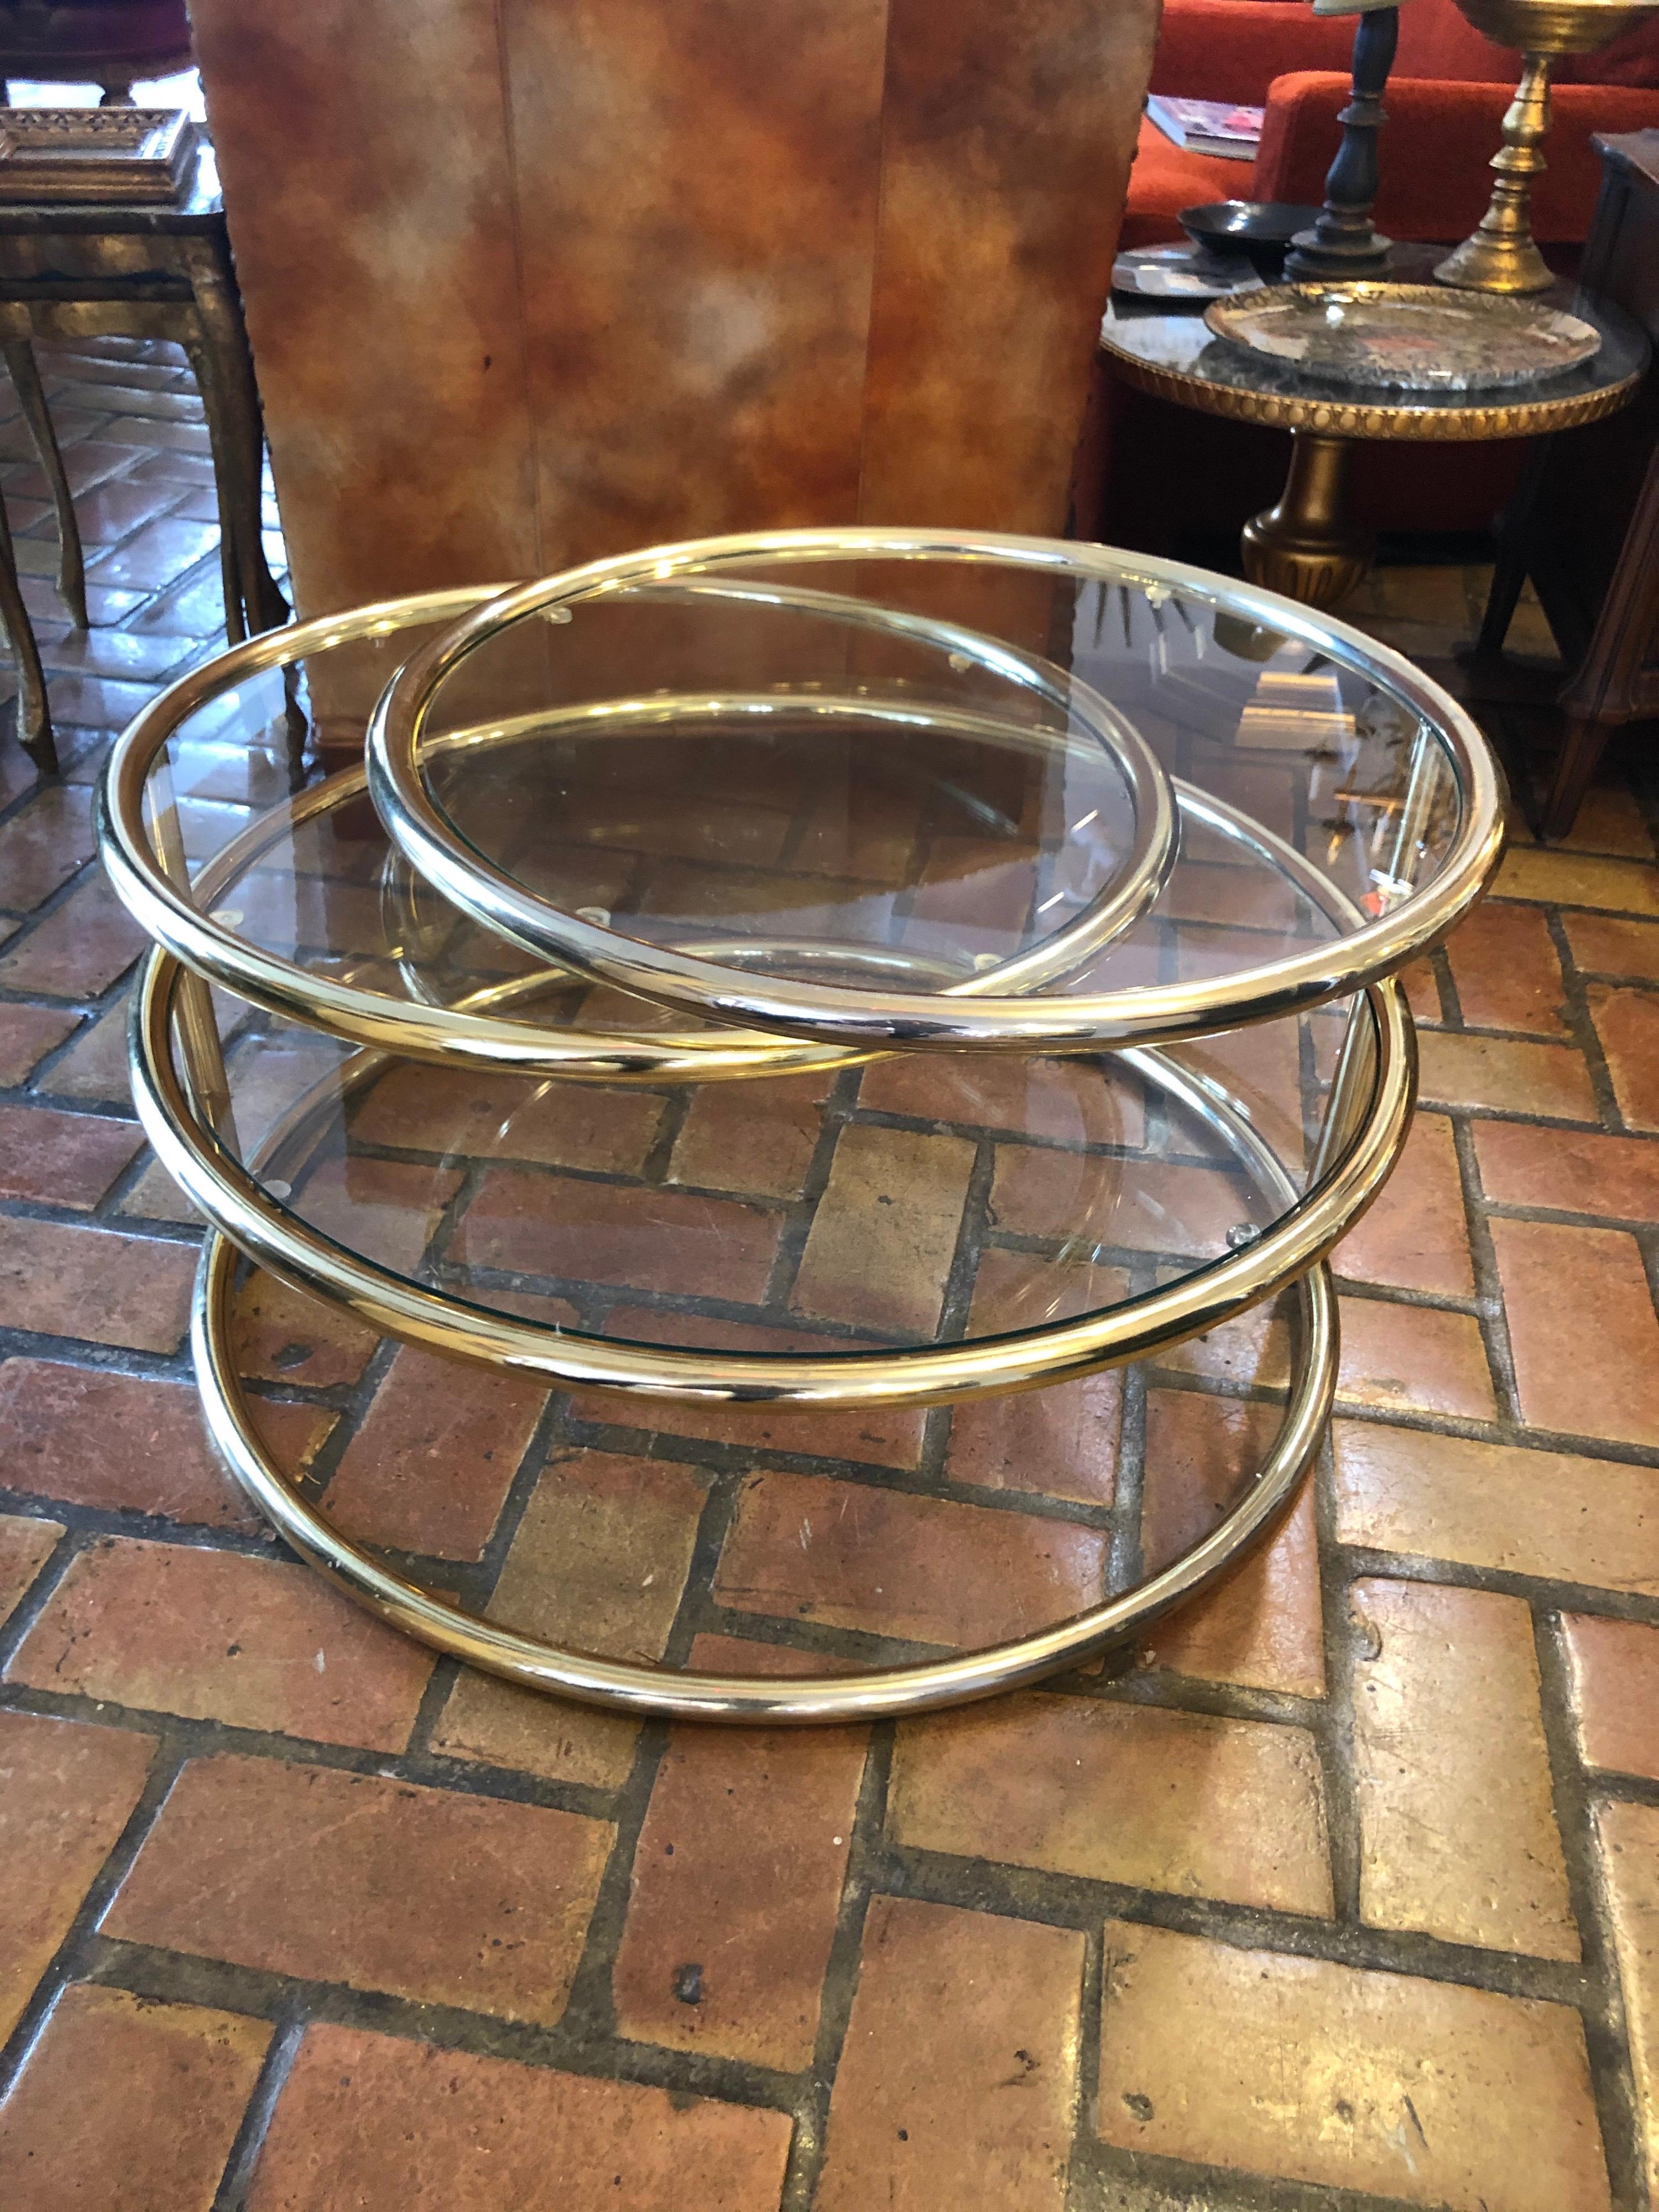 Brass and glass round three-tiered expandable table. Classic Milo Baughman styled
coffee table. Perfect for entertaining in small spaces to enlarge when needed. Bottom base has no shelf.
When fully extended width is 75